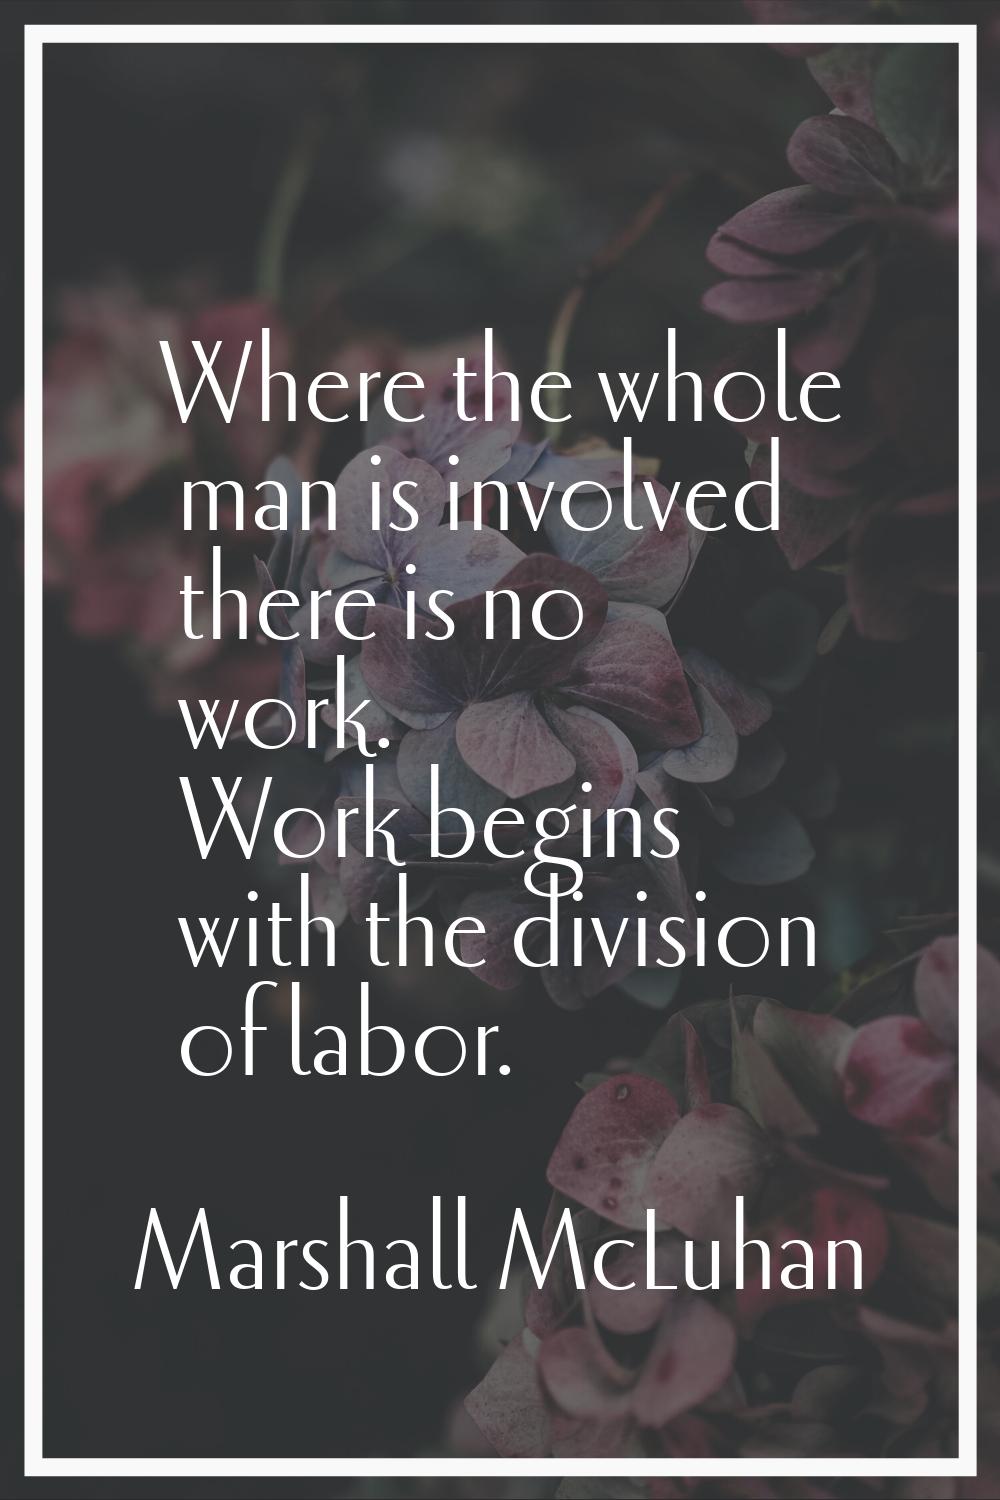 Where the whole man is involved there is no work. Work begins with the division of labor.